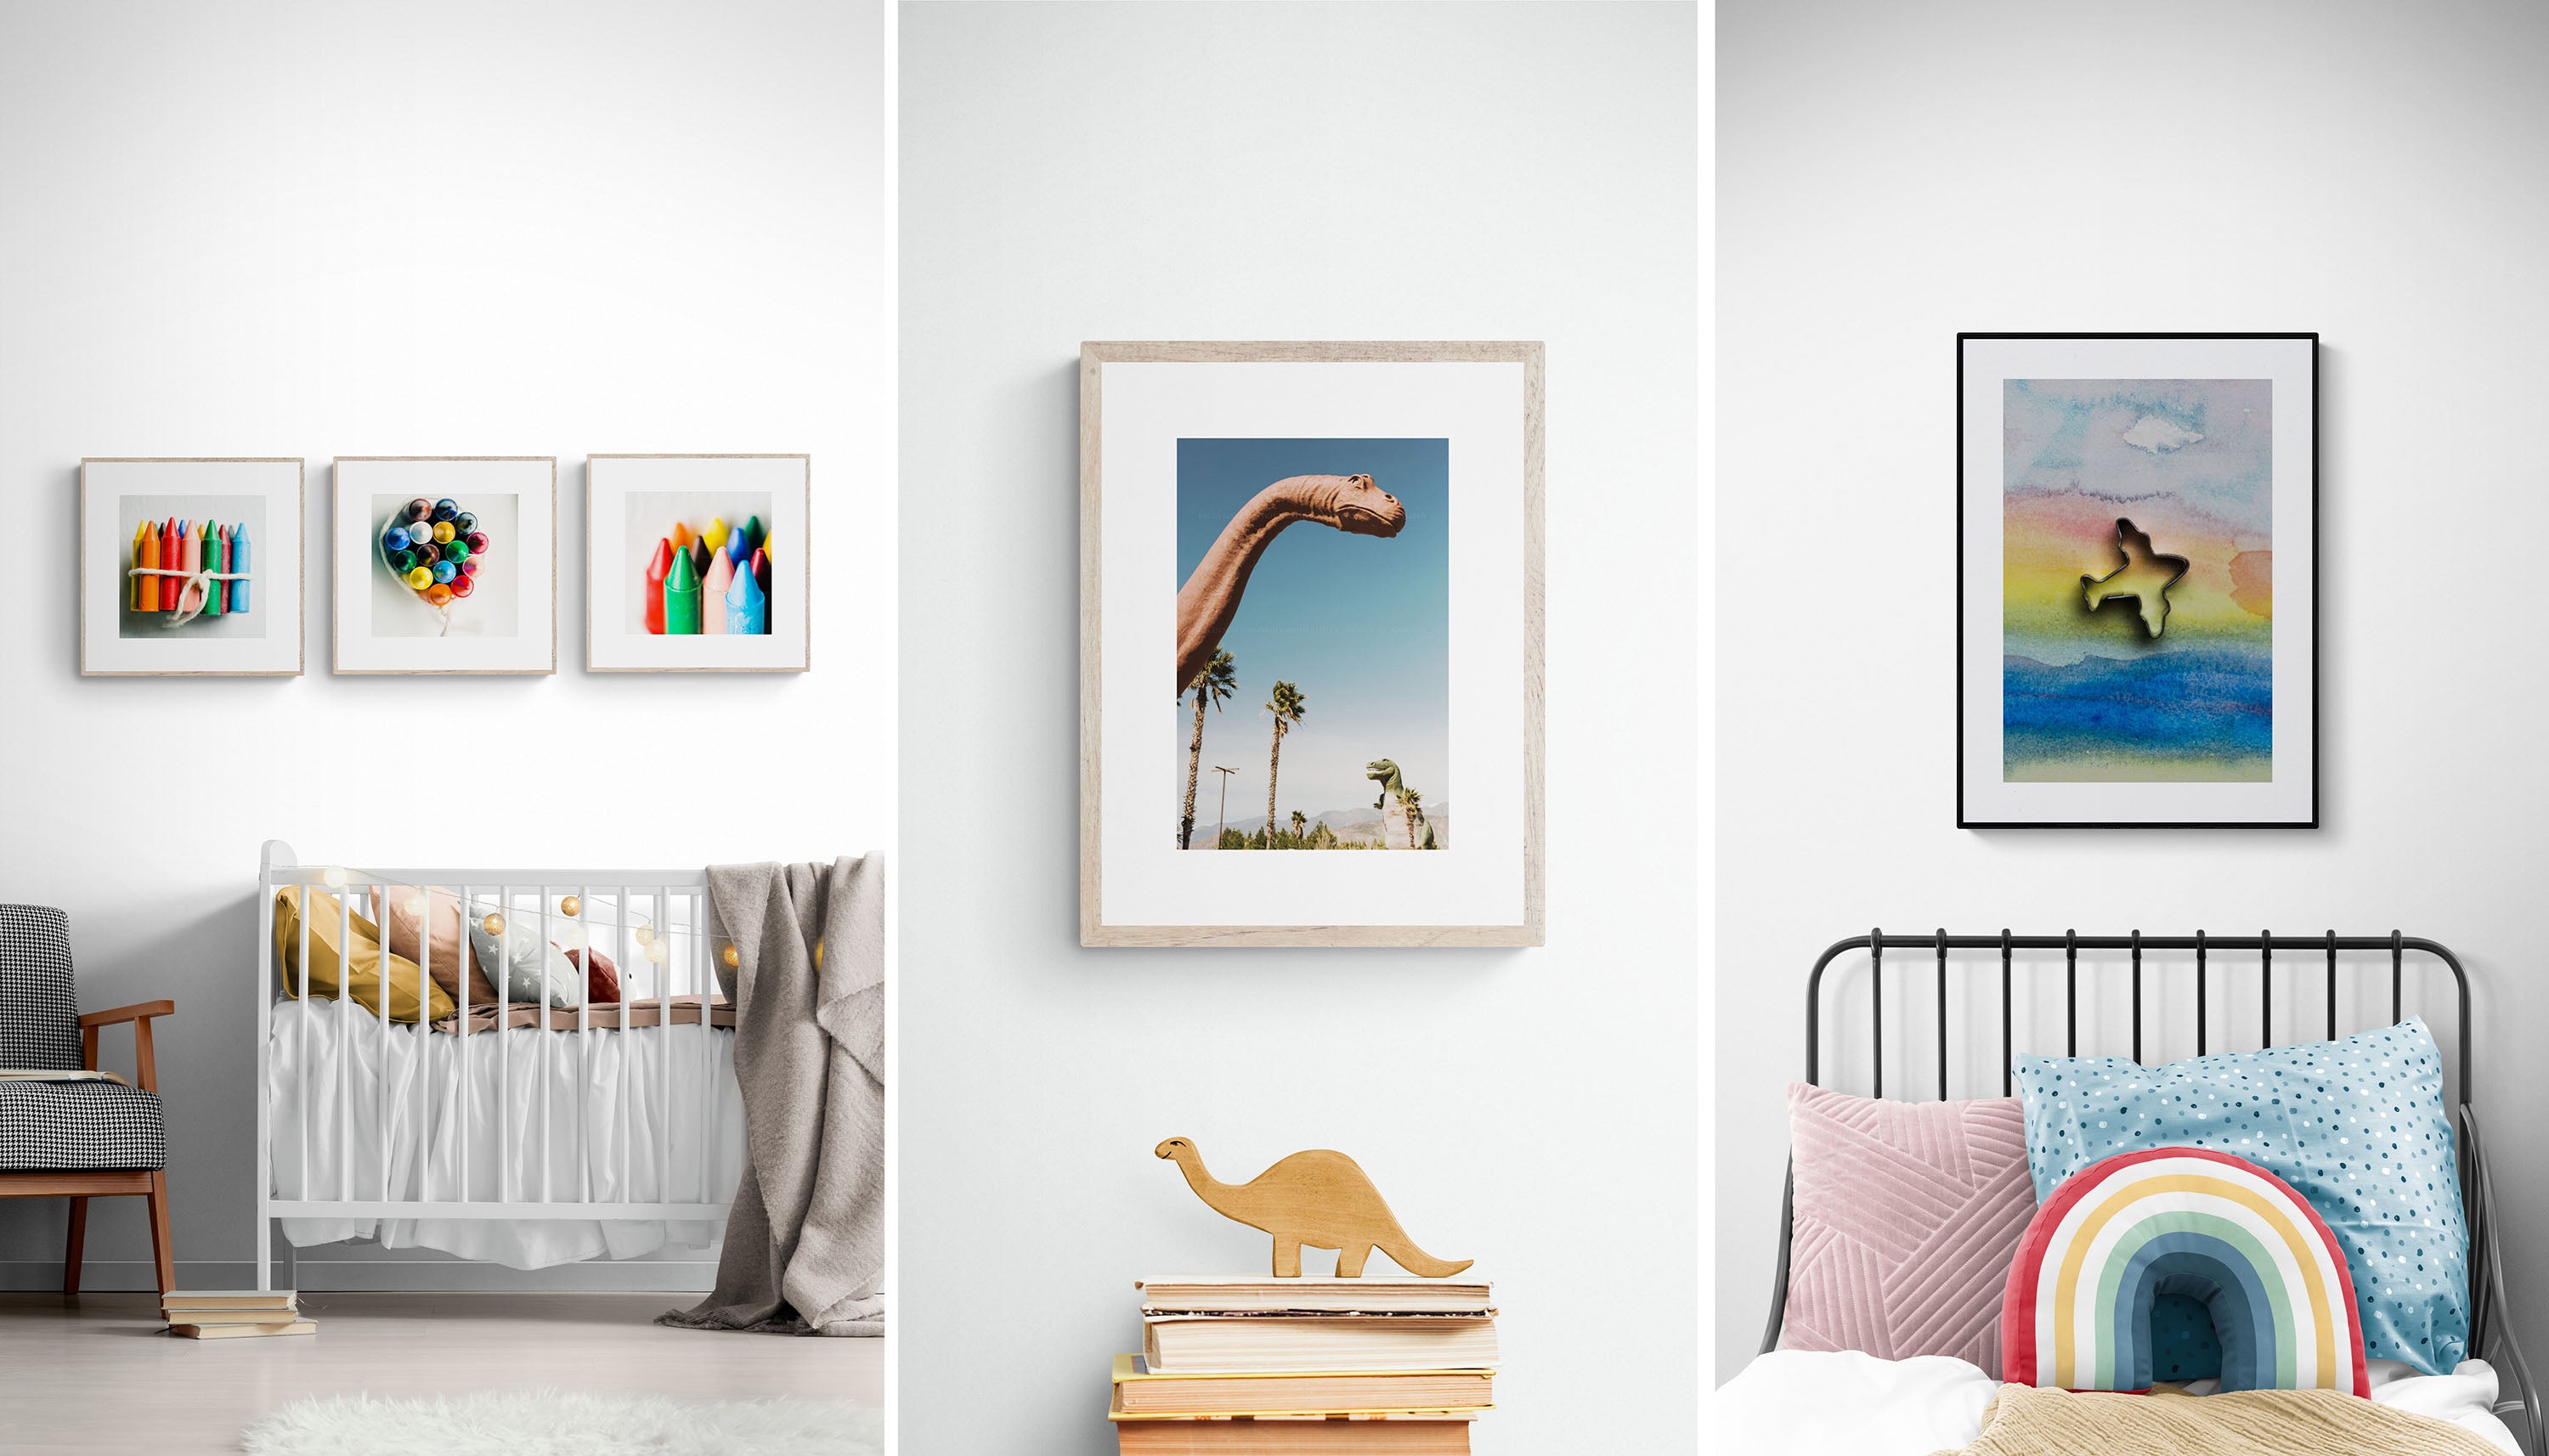 A set of 3 prints displayed in a nursery as wall art, photograph of the Cabazon Dinosaurs displayed in a kids room, a whimsical photograph of an airplane against watercolor skies in a children's room as wall art